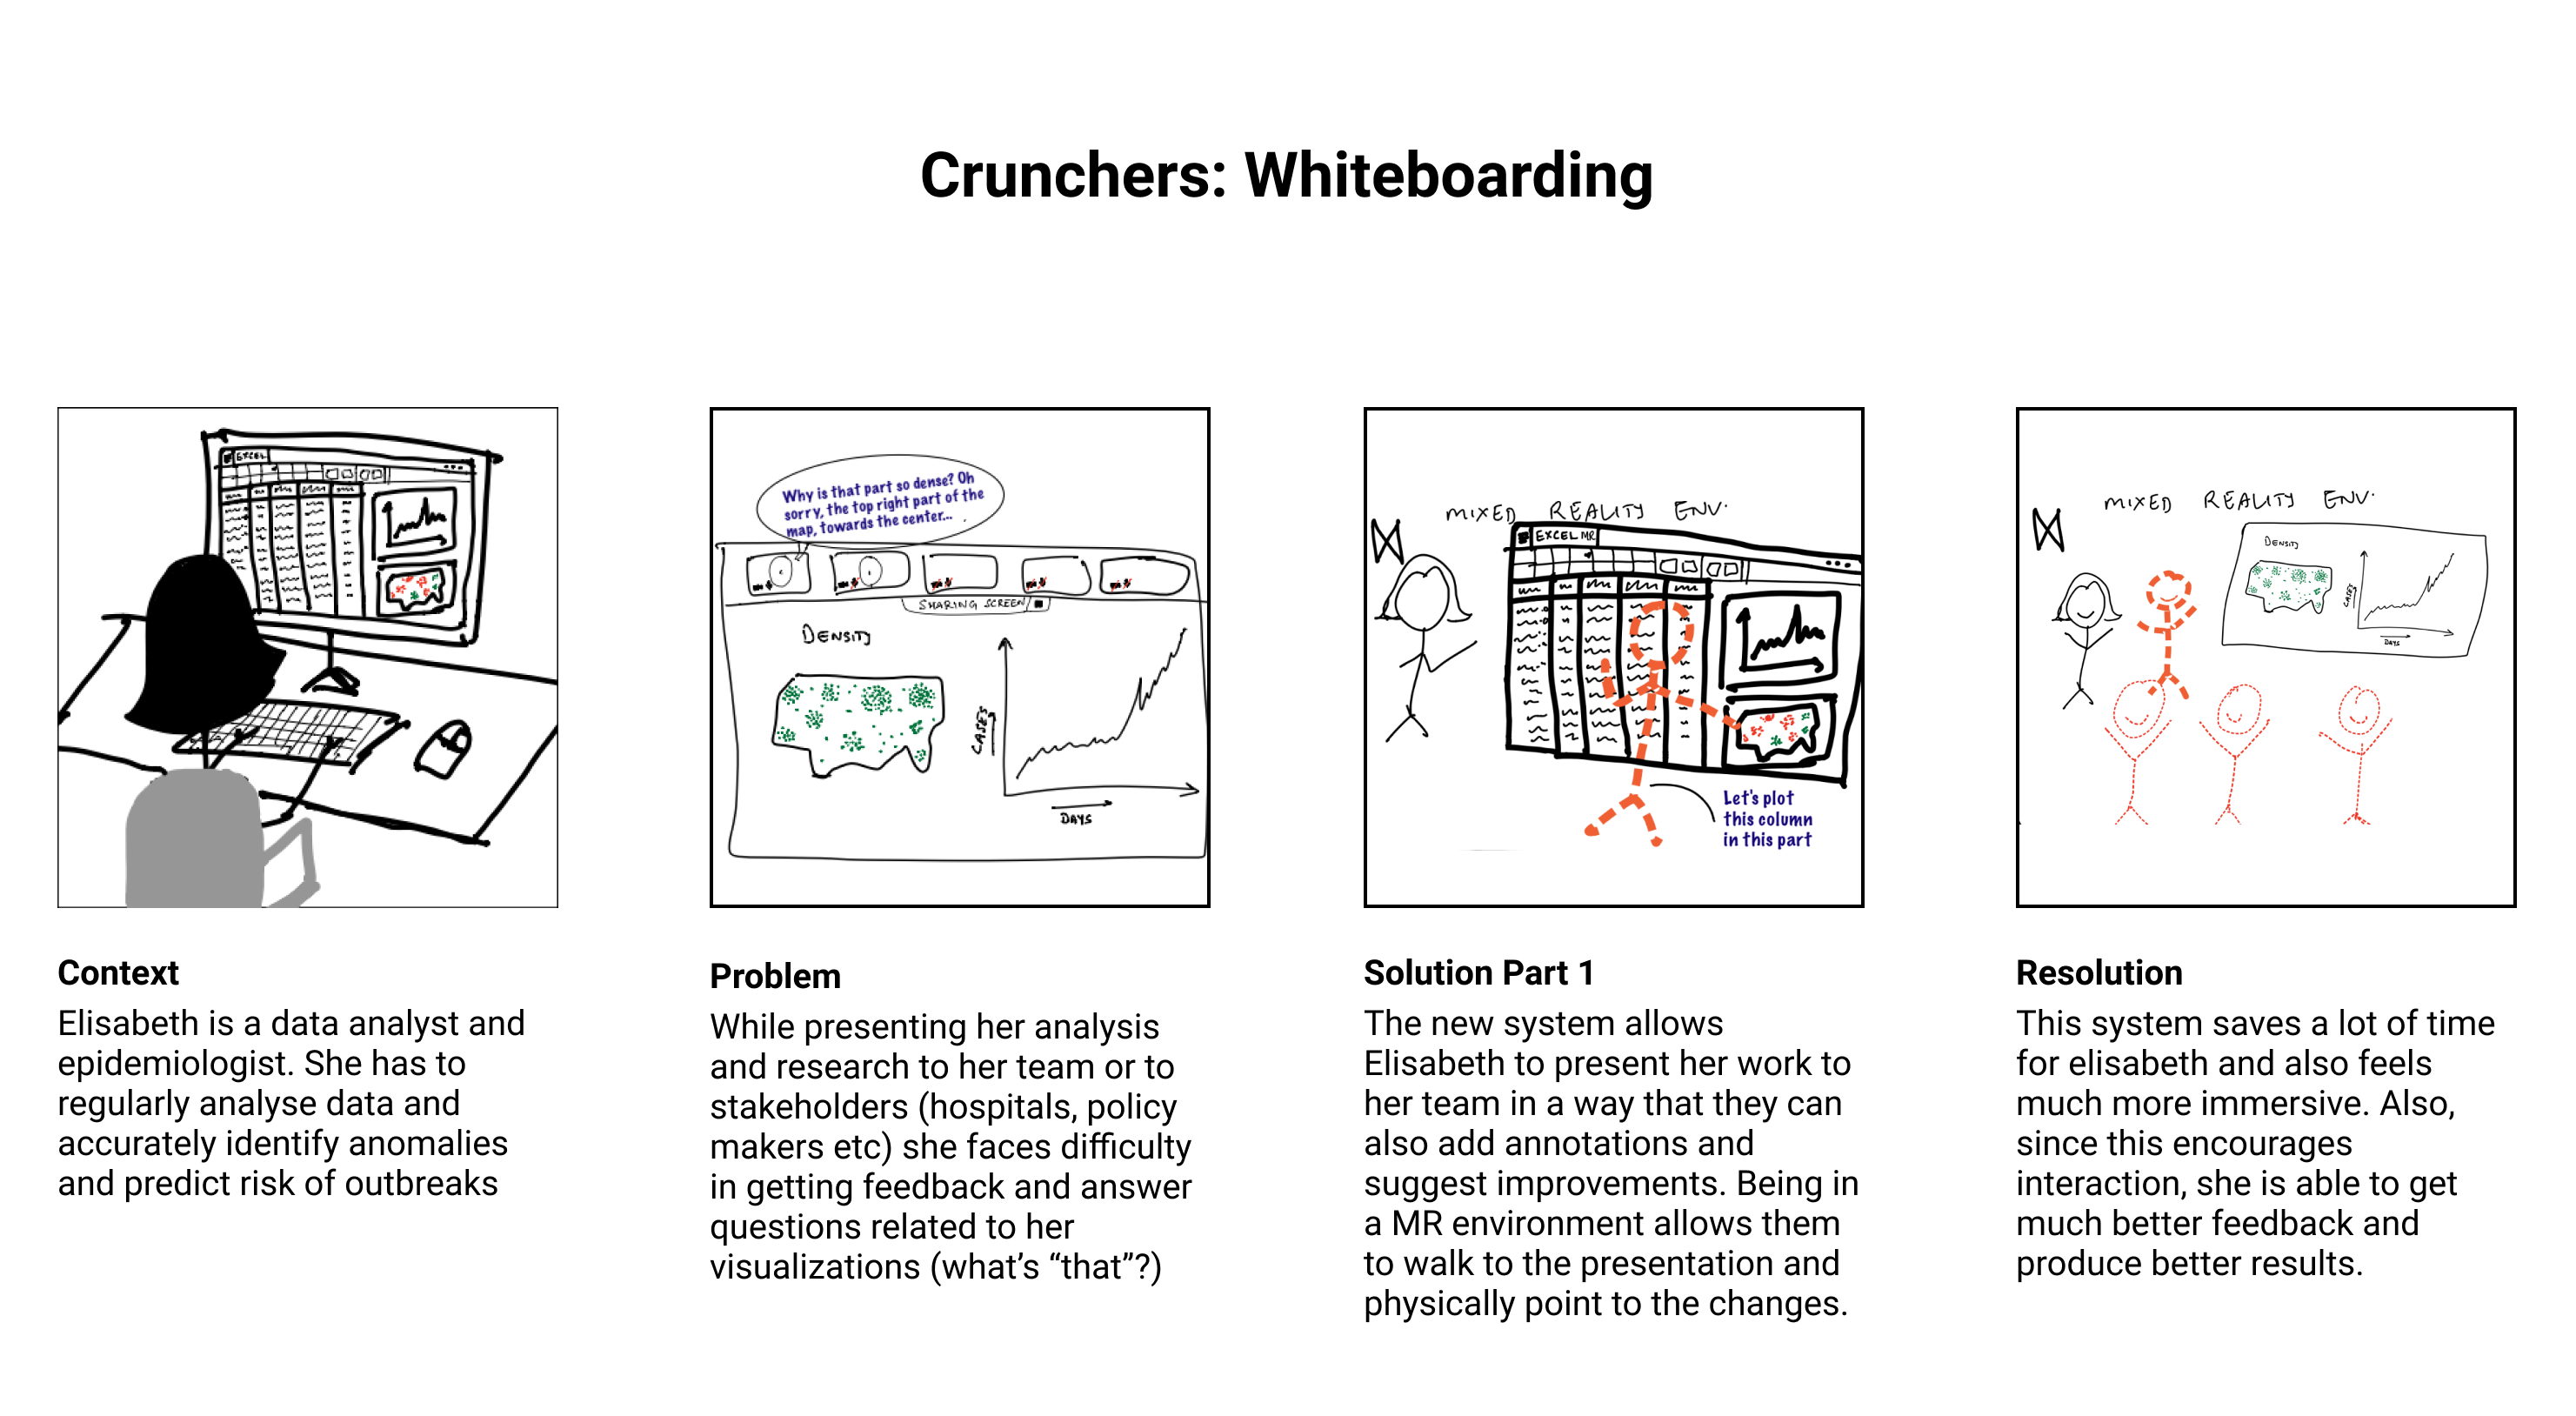 Crunchers can use MR whiteboards to highlight numbers and ideas